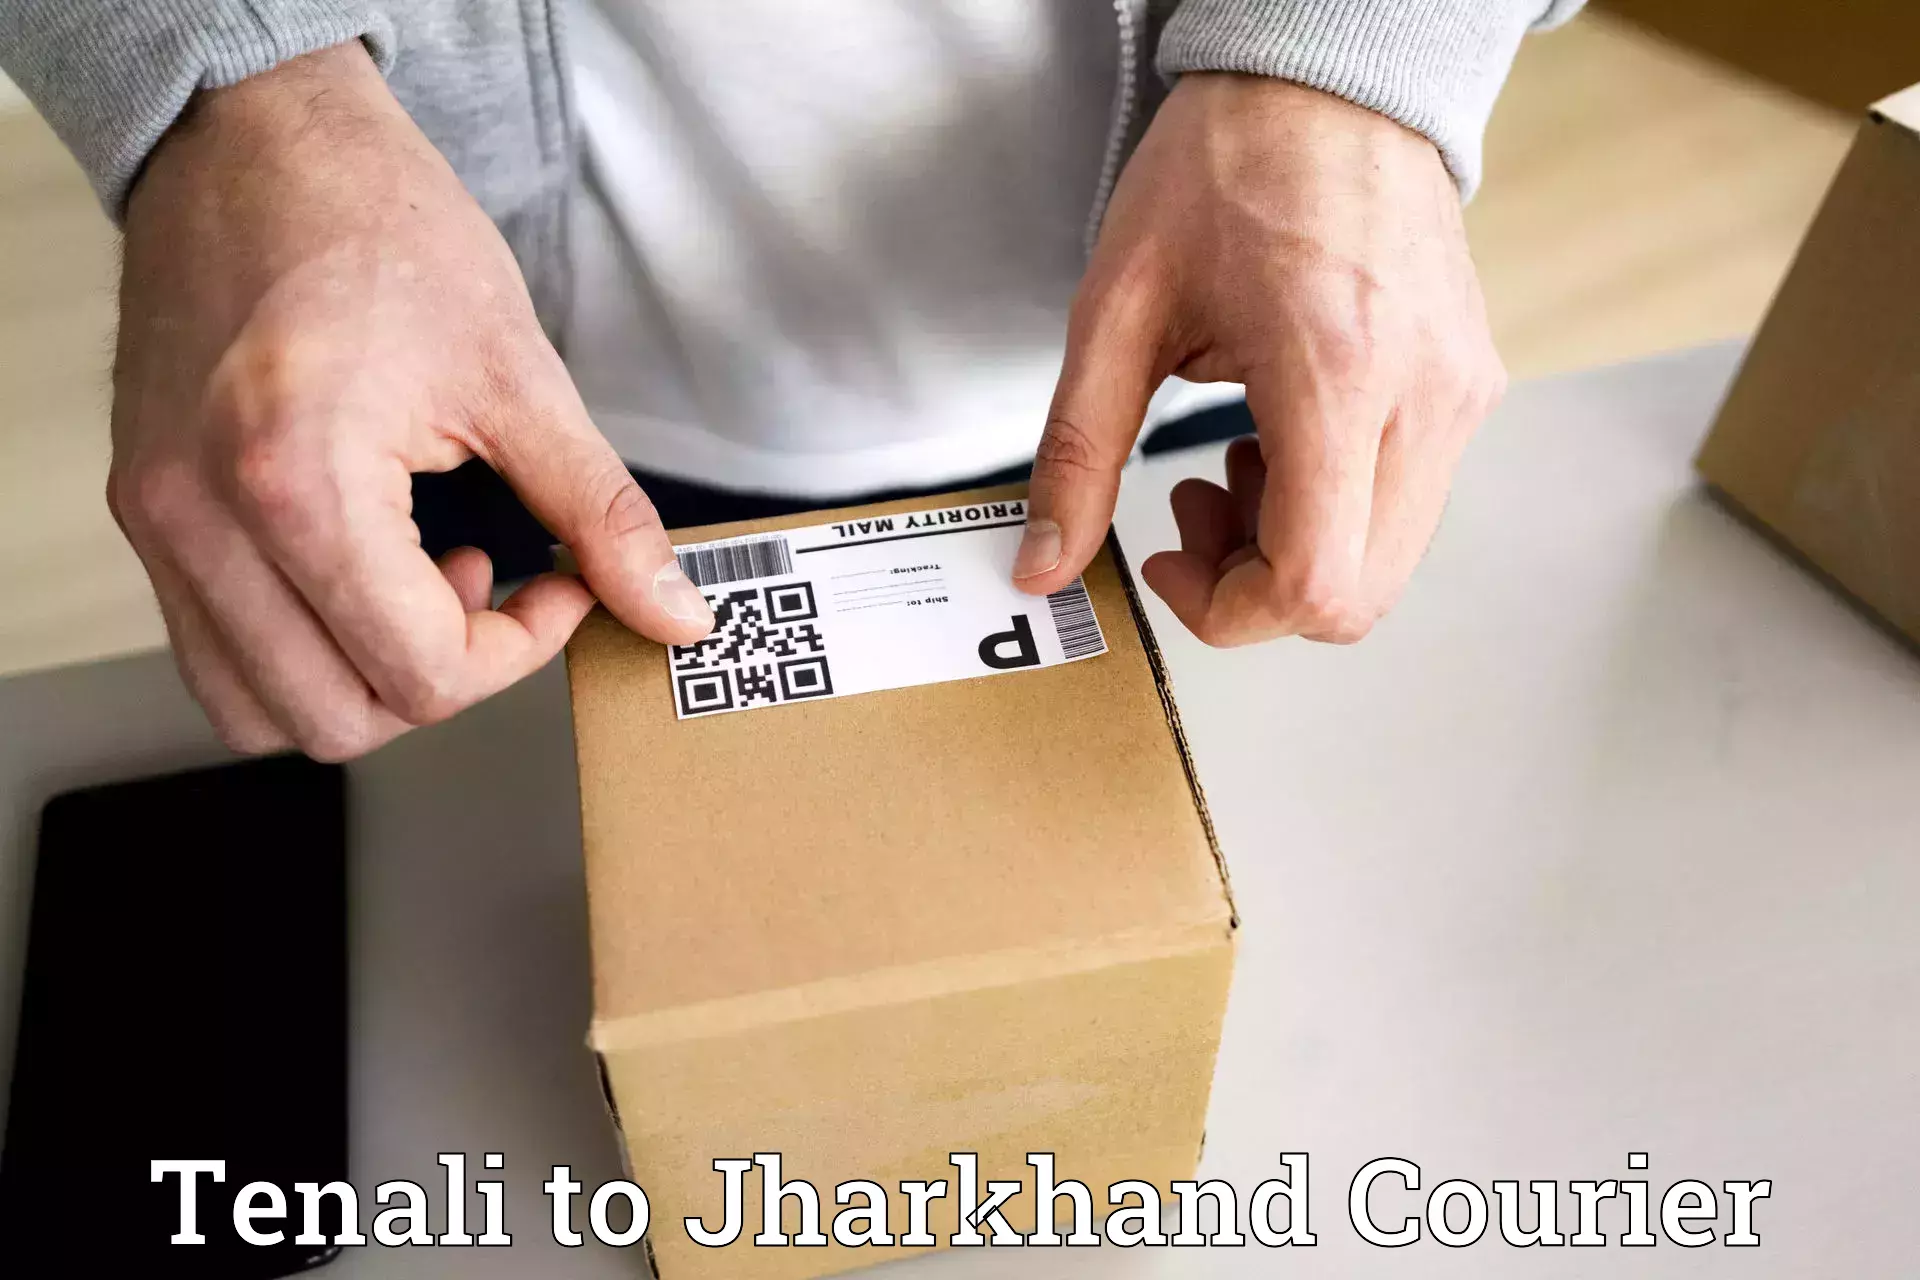 Comprehensive shipping network Tenali to Jharkhand